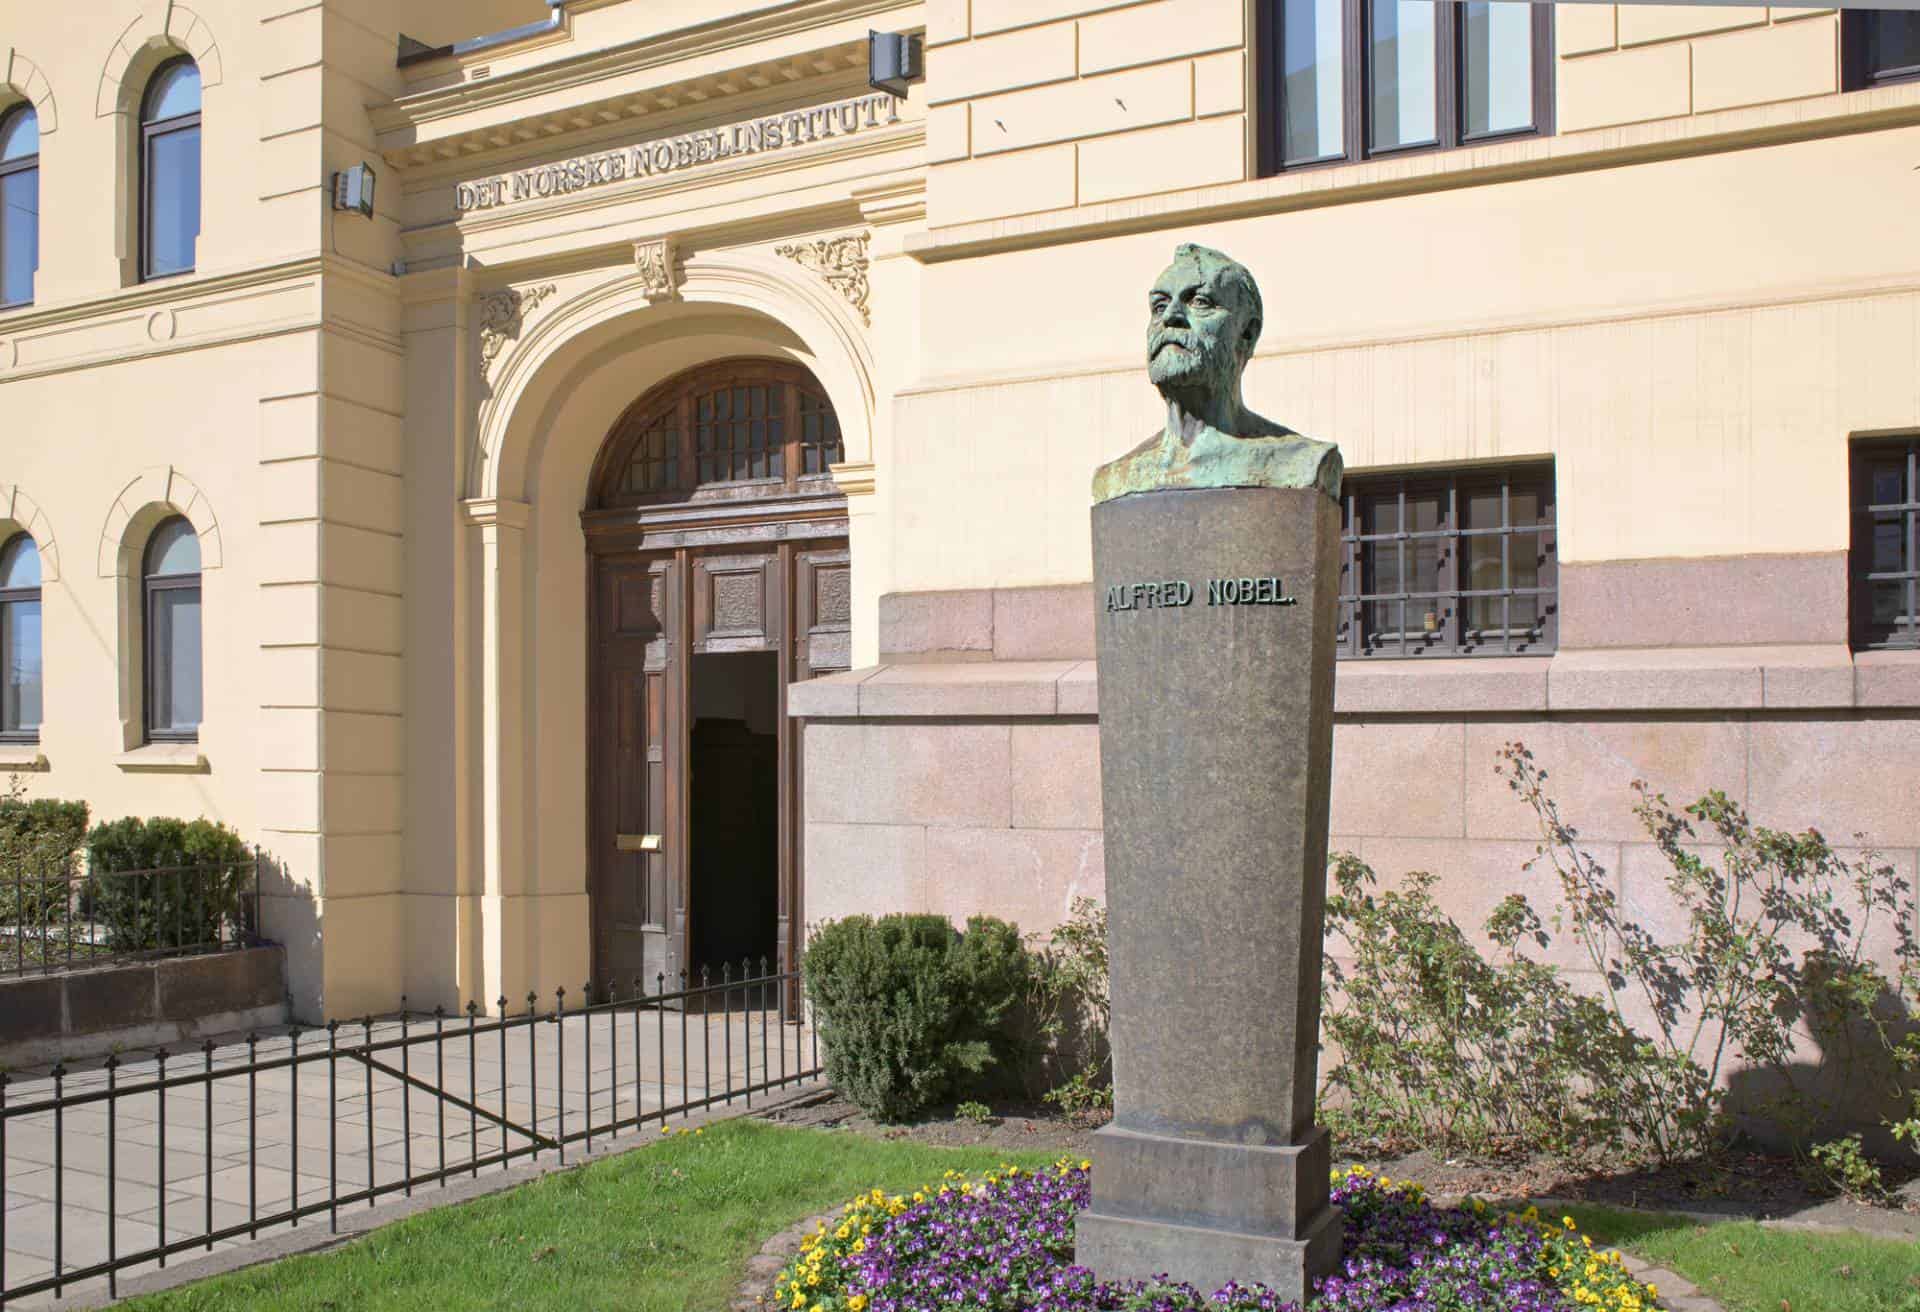 Entrance of the Norwegian Nobel Institute In Oslo, Norway with a bust of Alfred Nobel in the foreground.